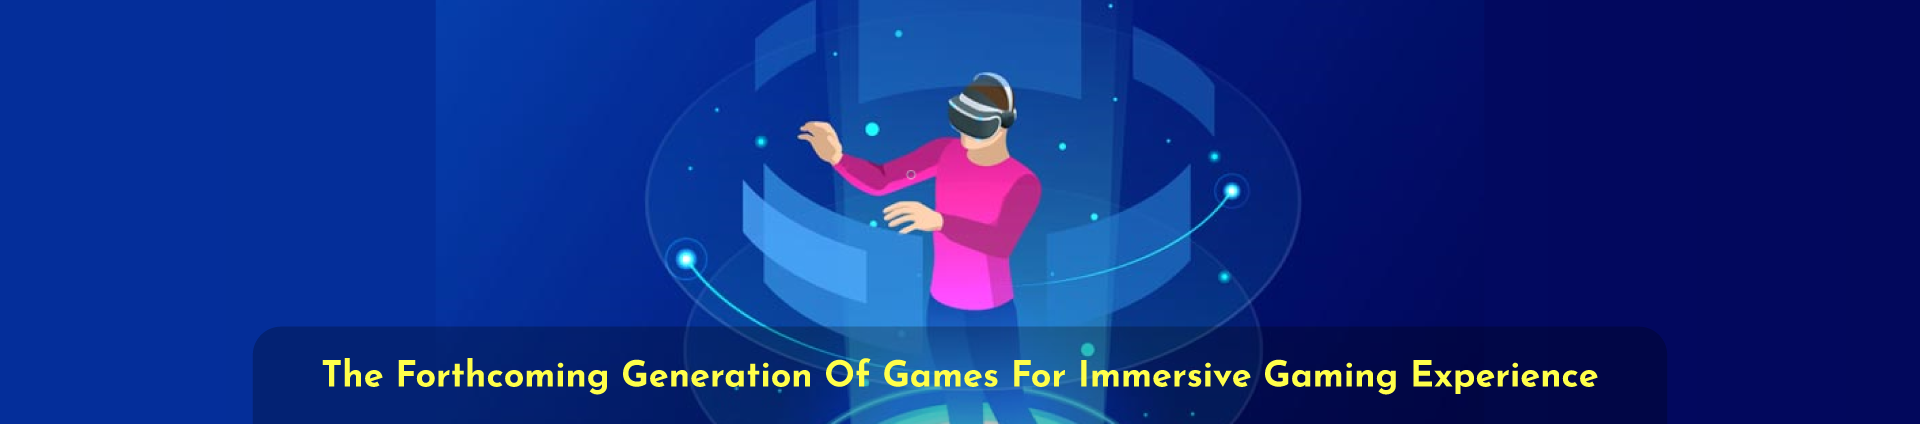 Augmented Reality Games - Immersive Gaming Experience